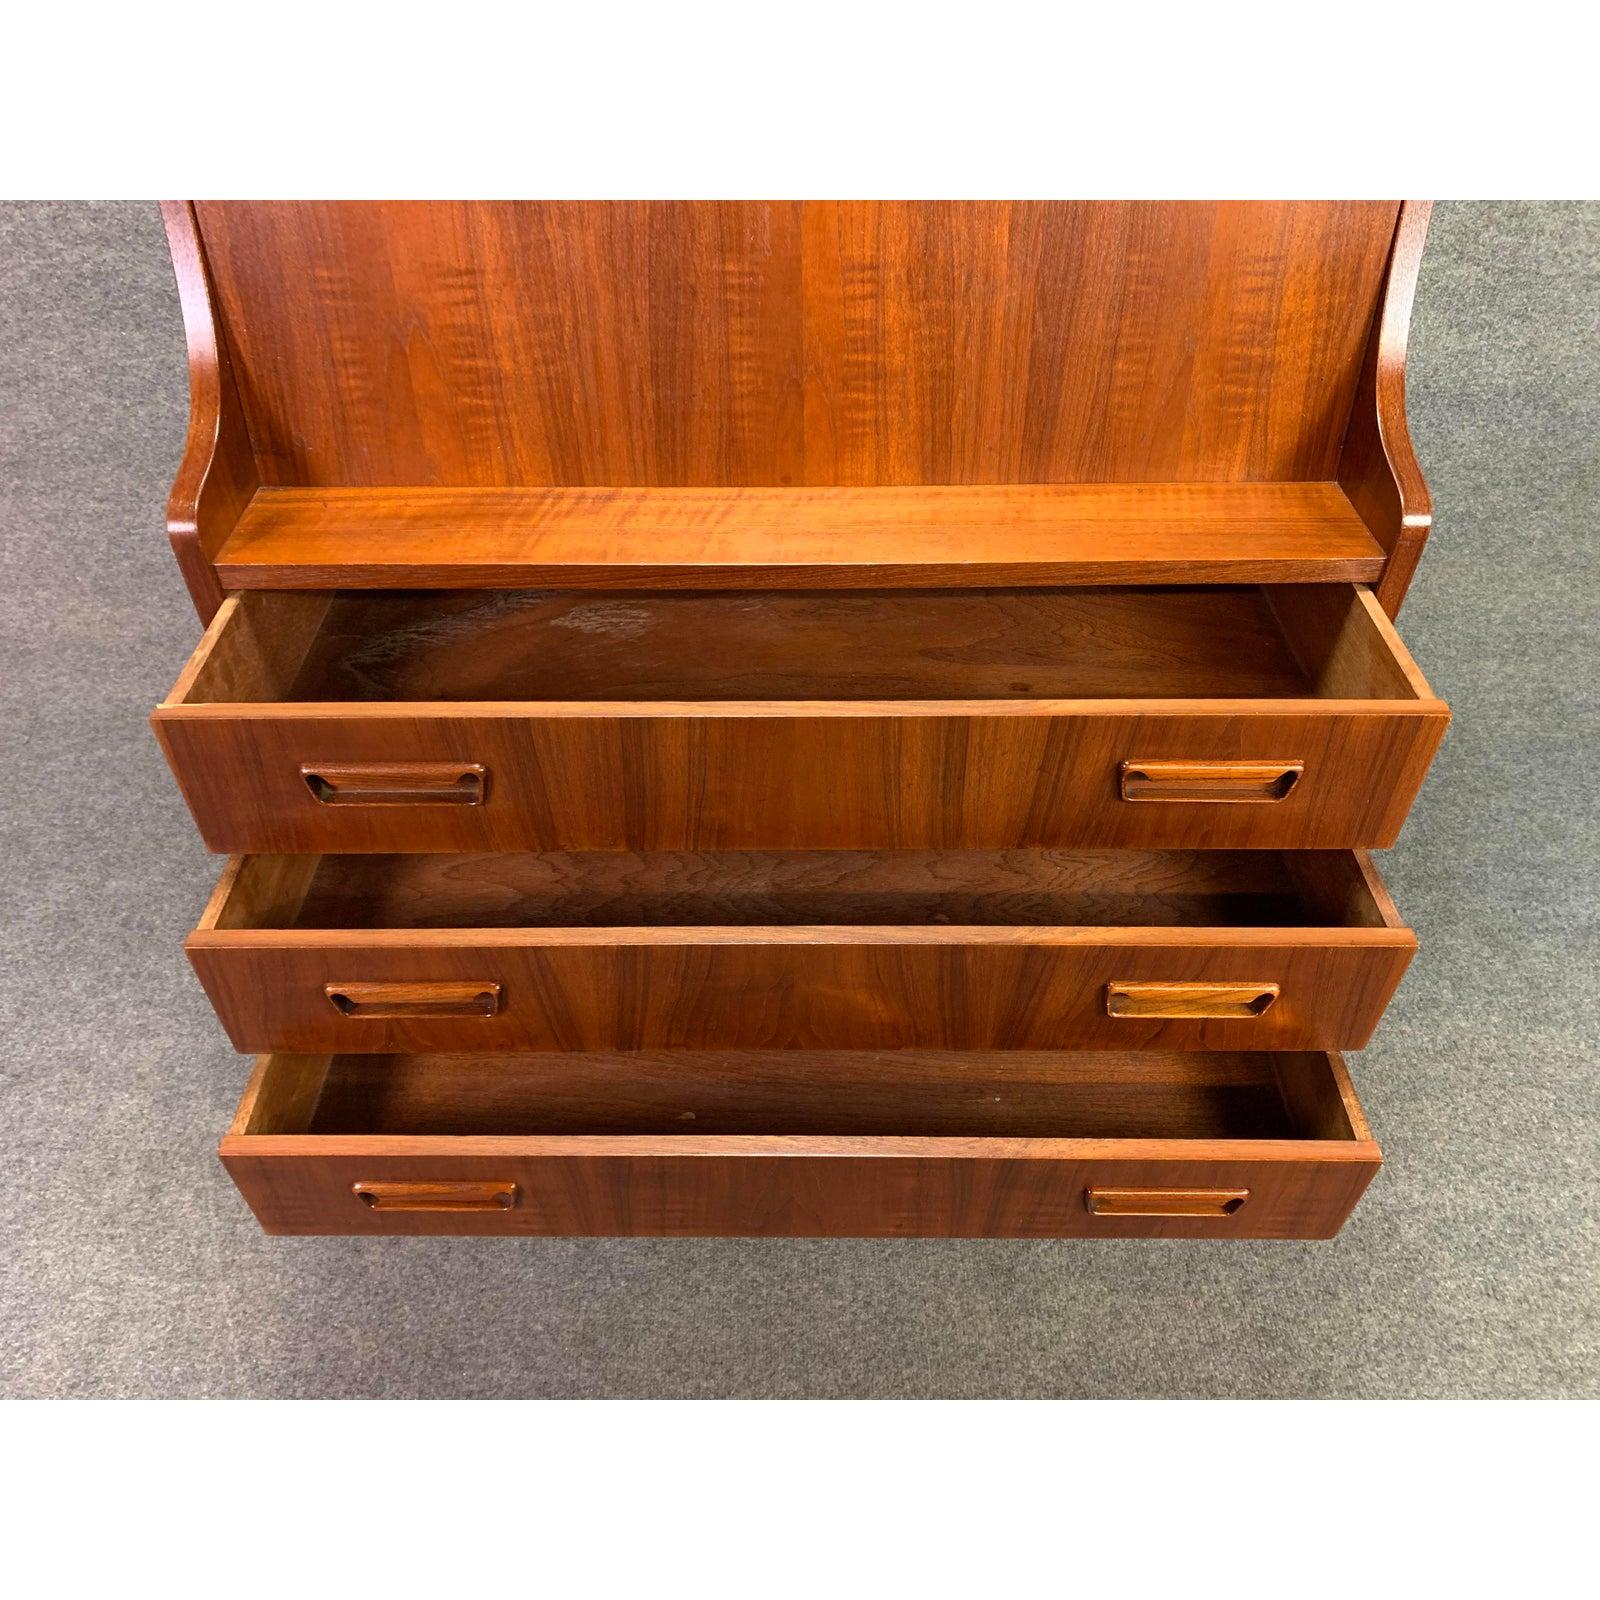 Here is a beautiful Scandinavian Modern secretary desk in teak wood designed by Gunner Nielsen Tibergaard in the 1960 and manufactured in Denmark. This exquisite piece, recently imported from Copenhagen to California before is restoration, features